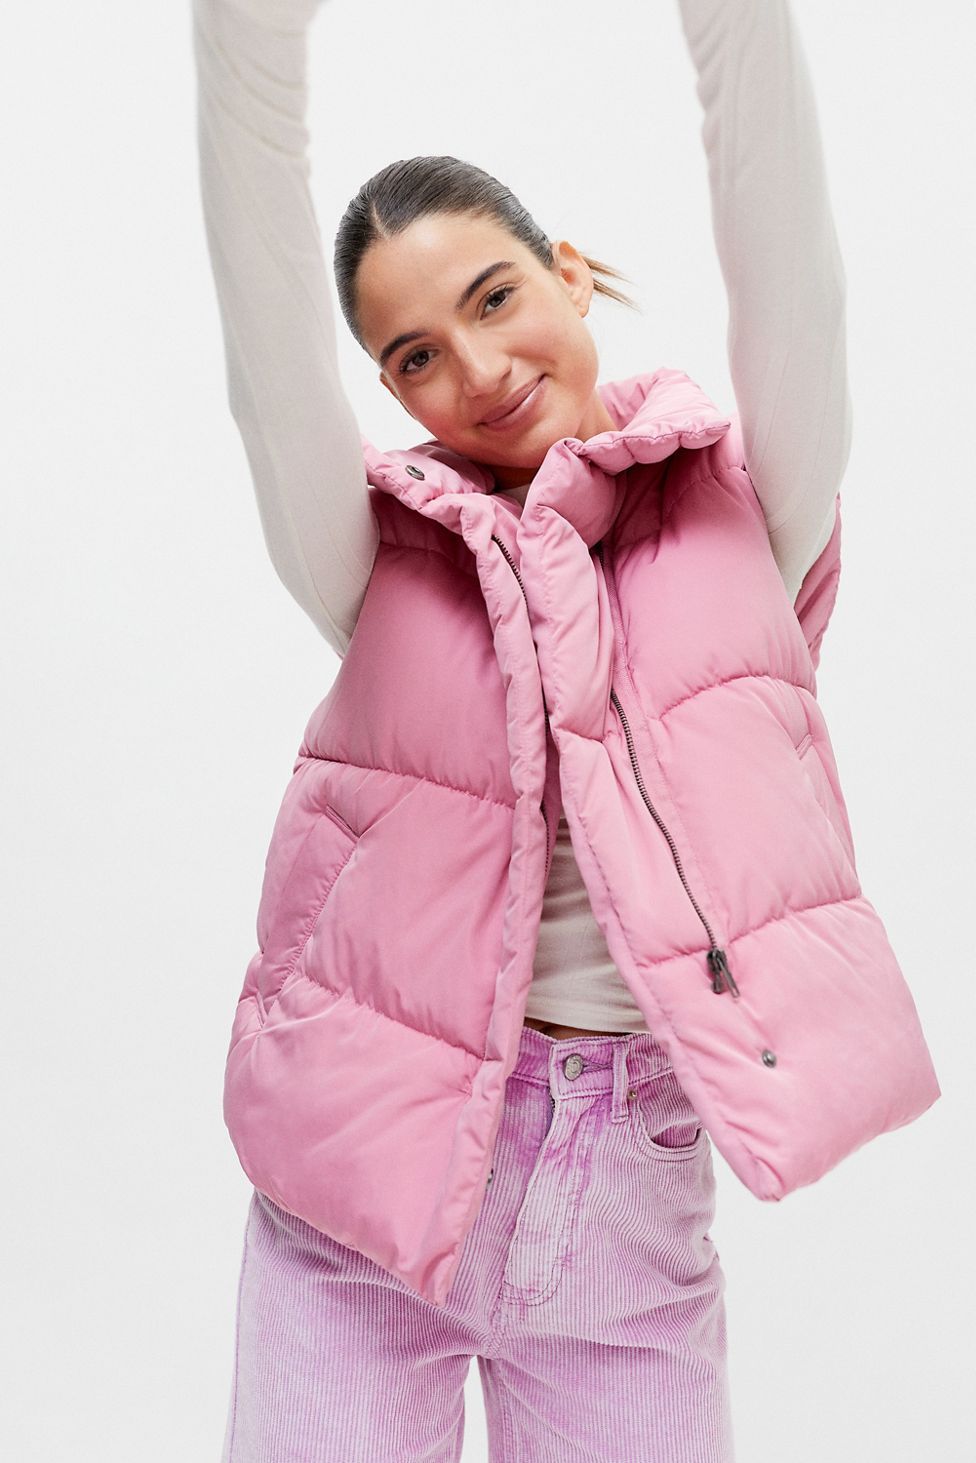 20 Best Puffer Vests for Women in 2022 - Quilted Outerwear Vests